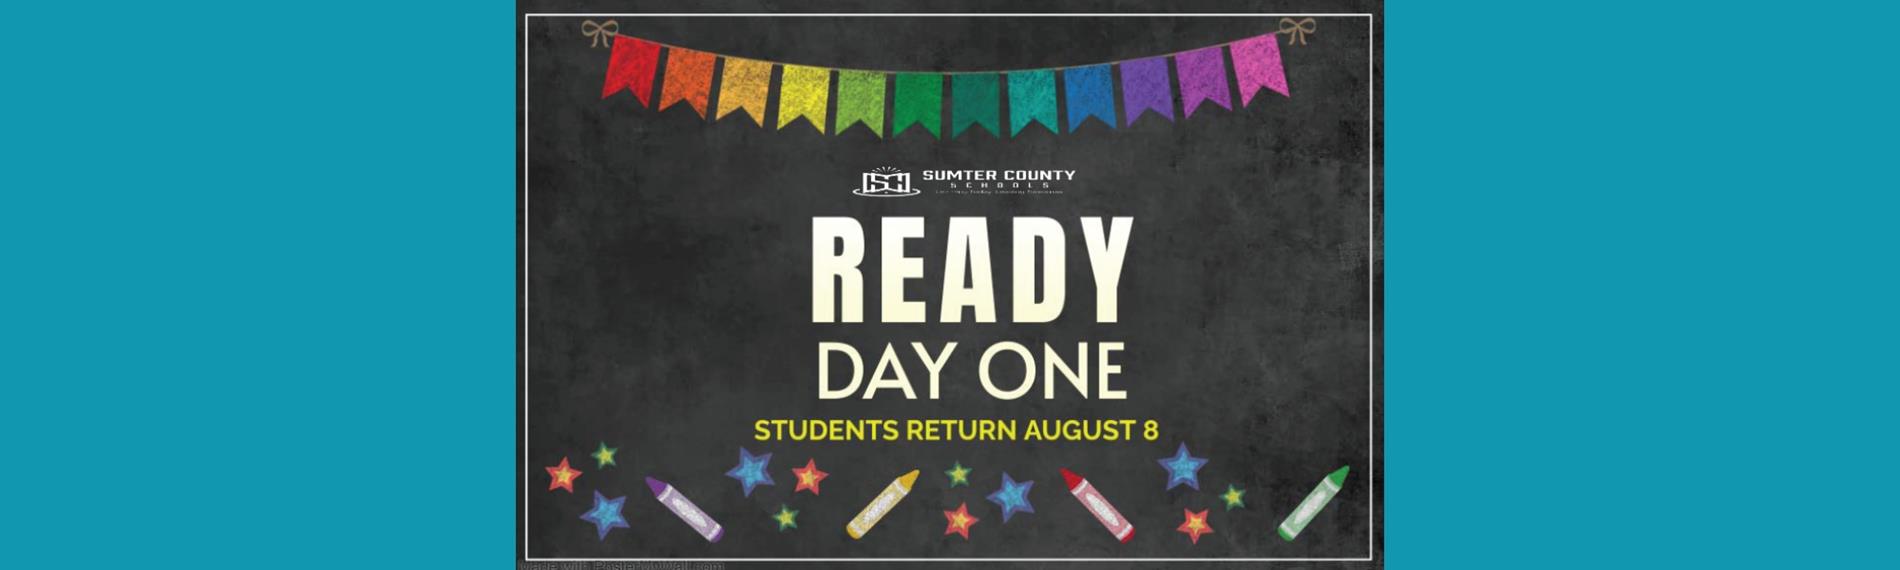 Sumter County Schools Ready Day One - Students return August 8